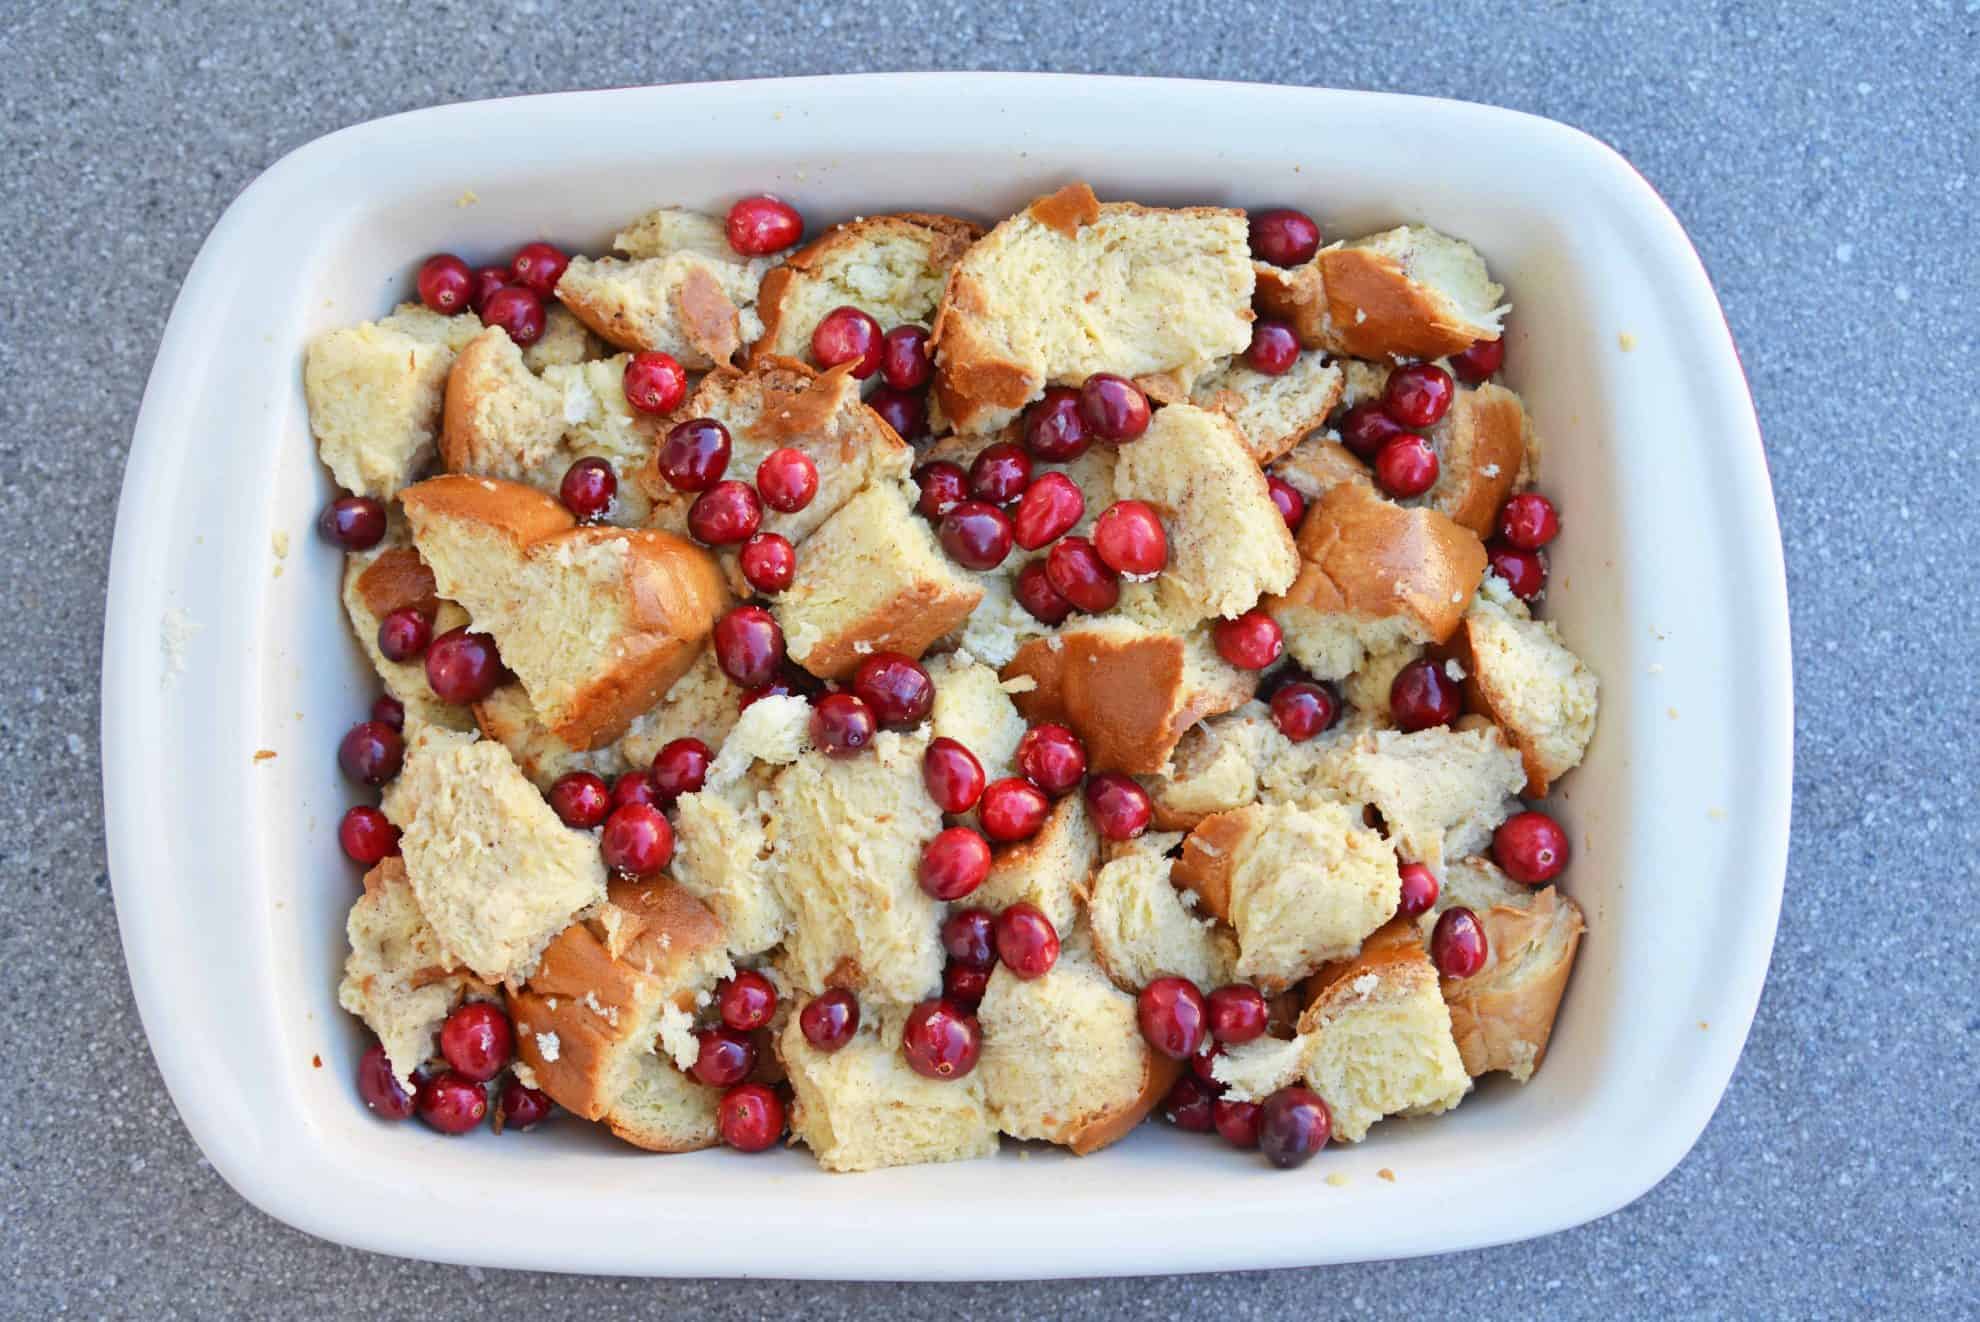 Cranberry French Toast Casserole is one of the best recipes using cranberries you'll ever make! A French toast casserole perfect for Christmas breakfast! #frenchtoastcasserole #christmasbreakfast #recipesthatusecranberries www.savoryexperiments.com